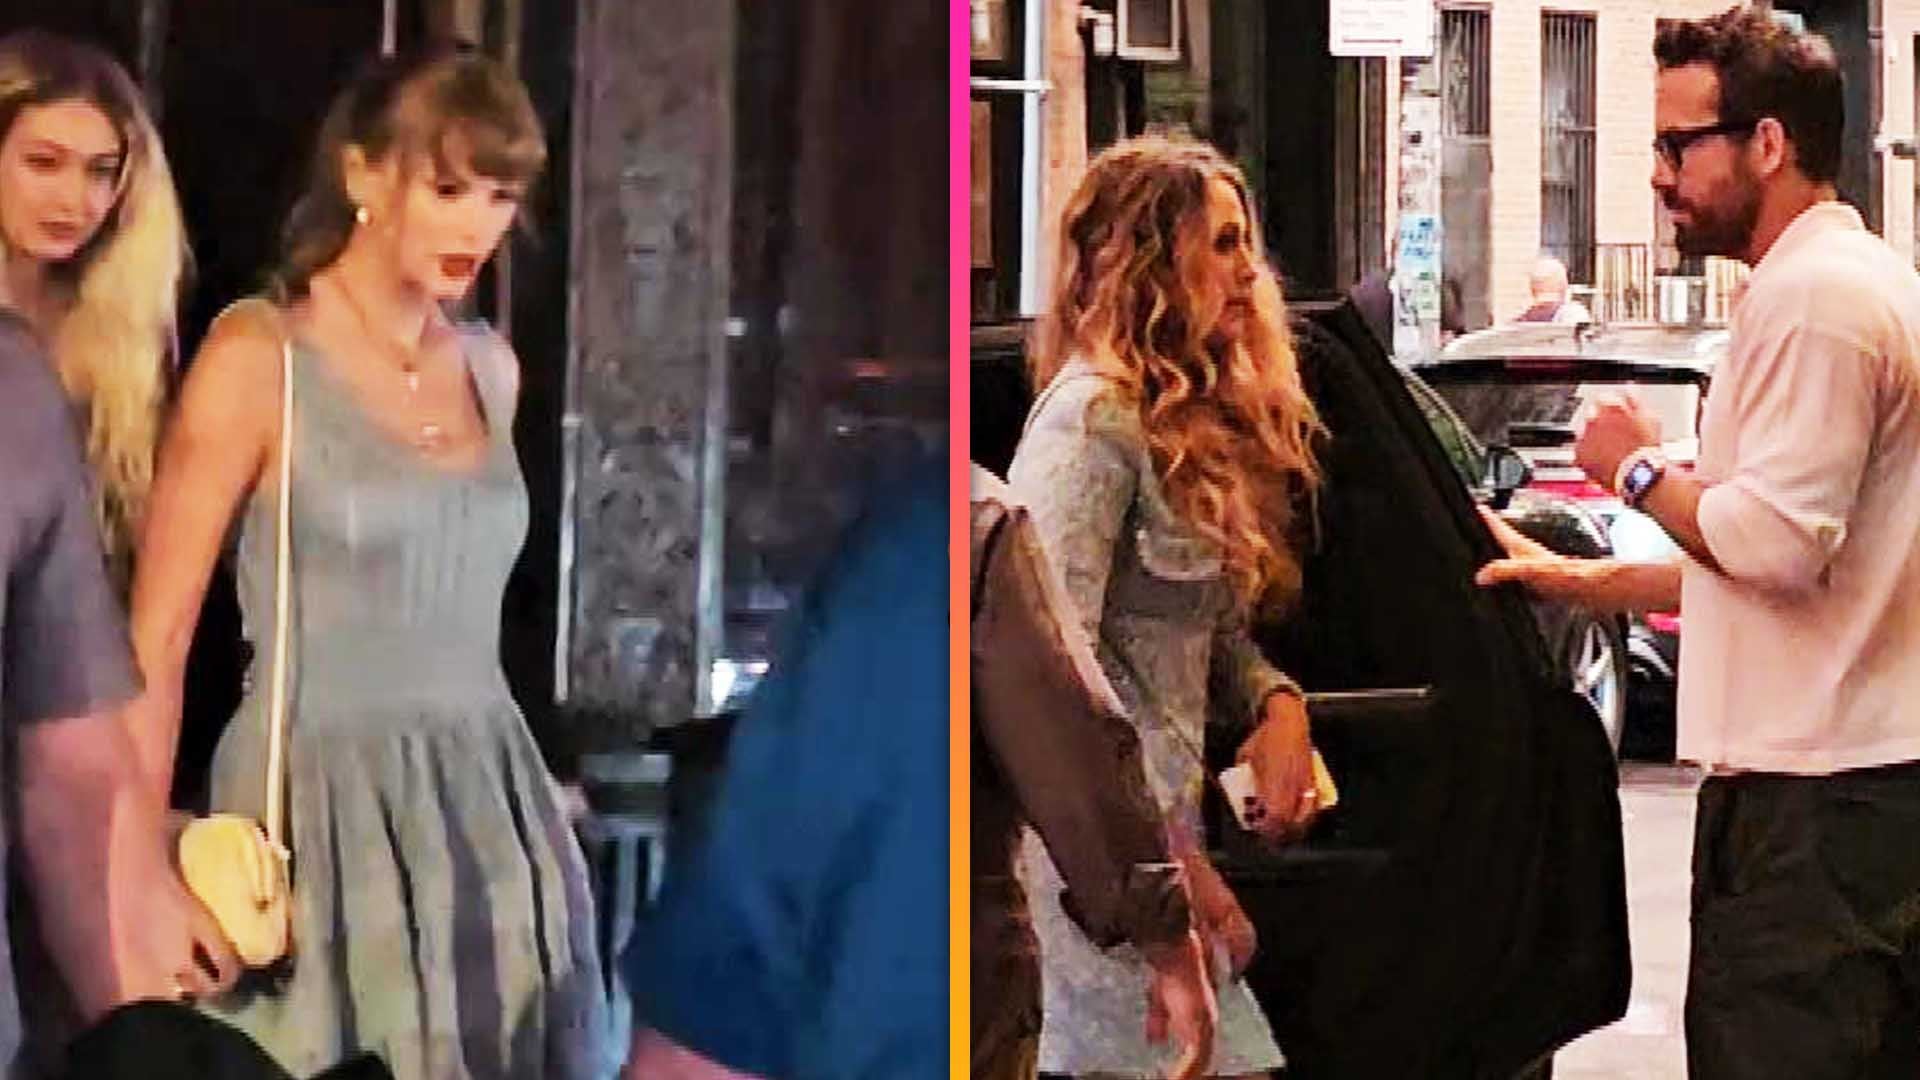 Taylor Swift and Blake Lively Get Together for a Girls' Night Out